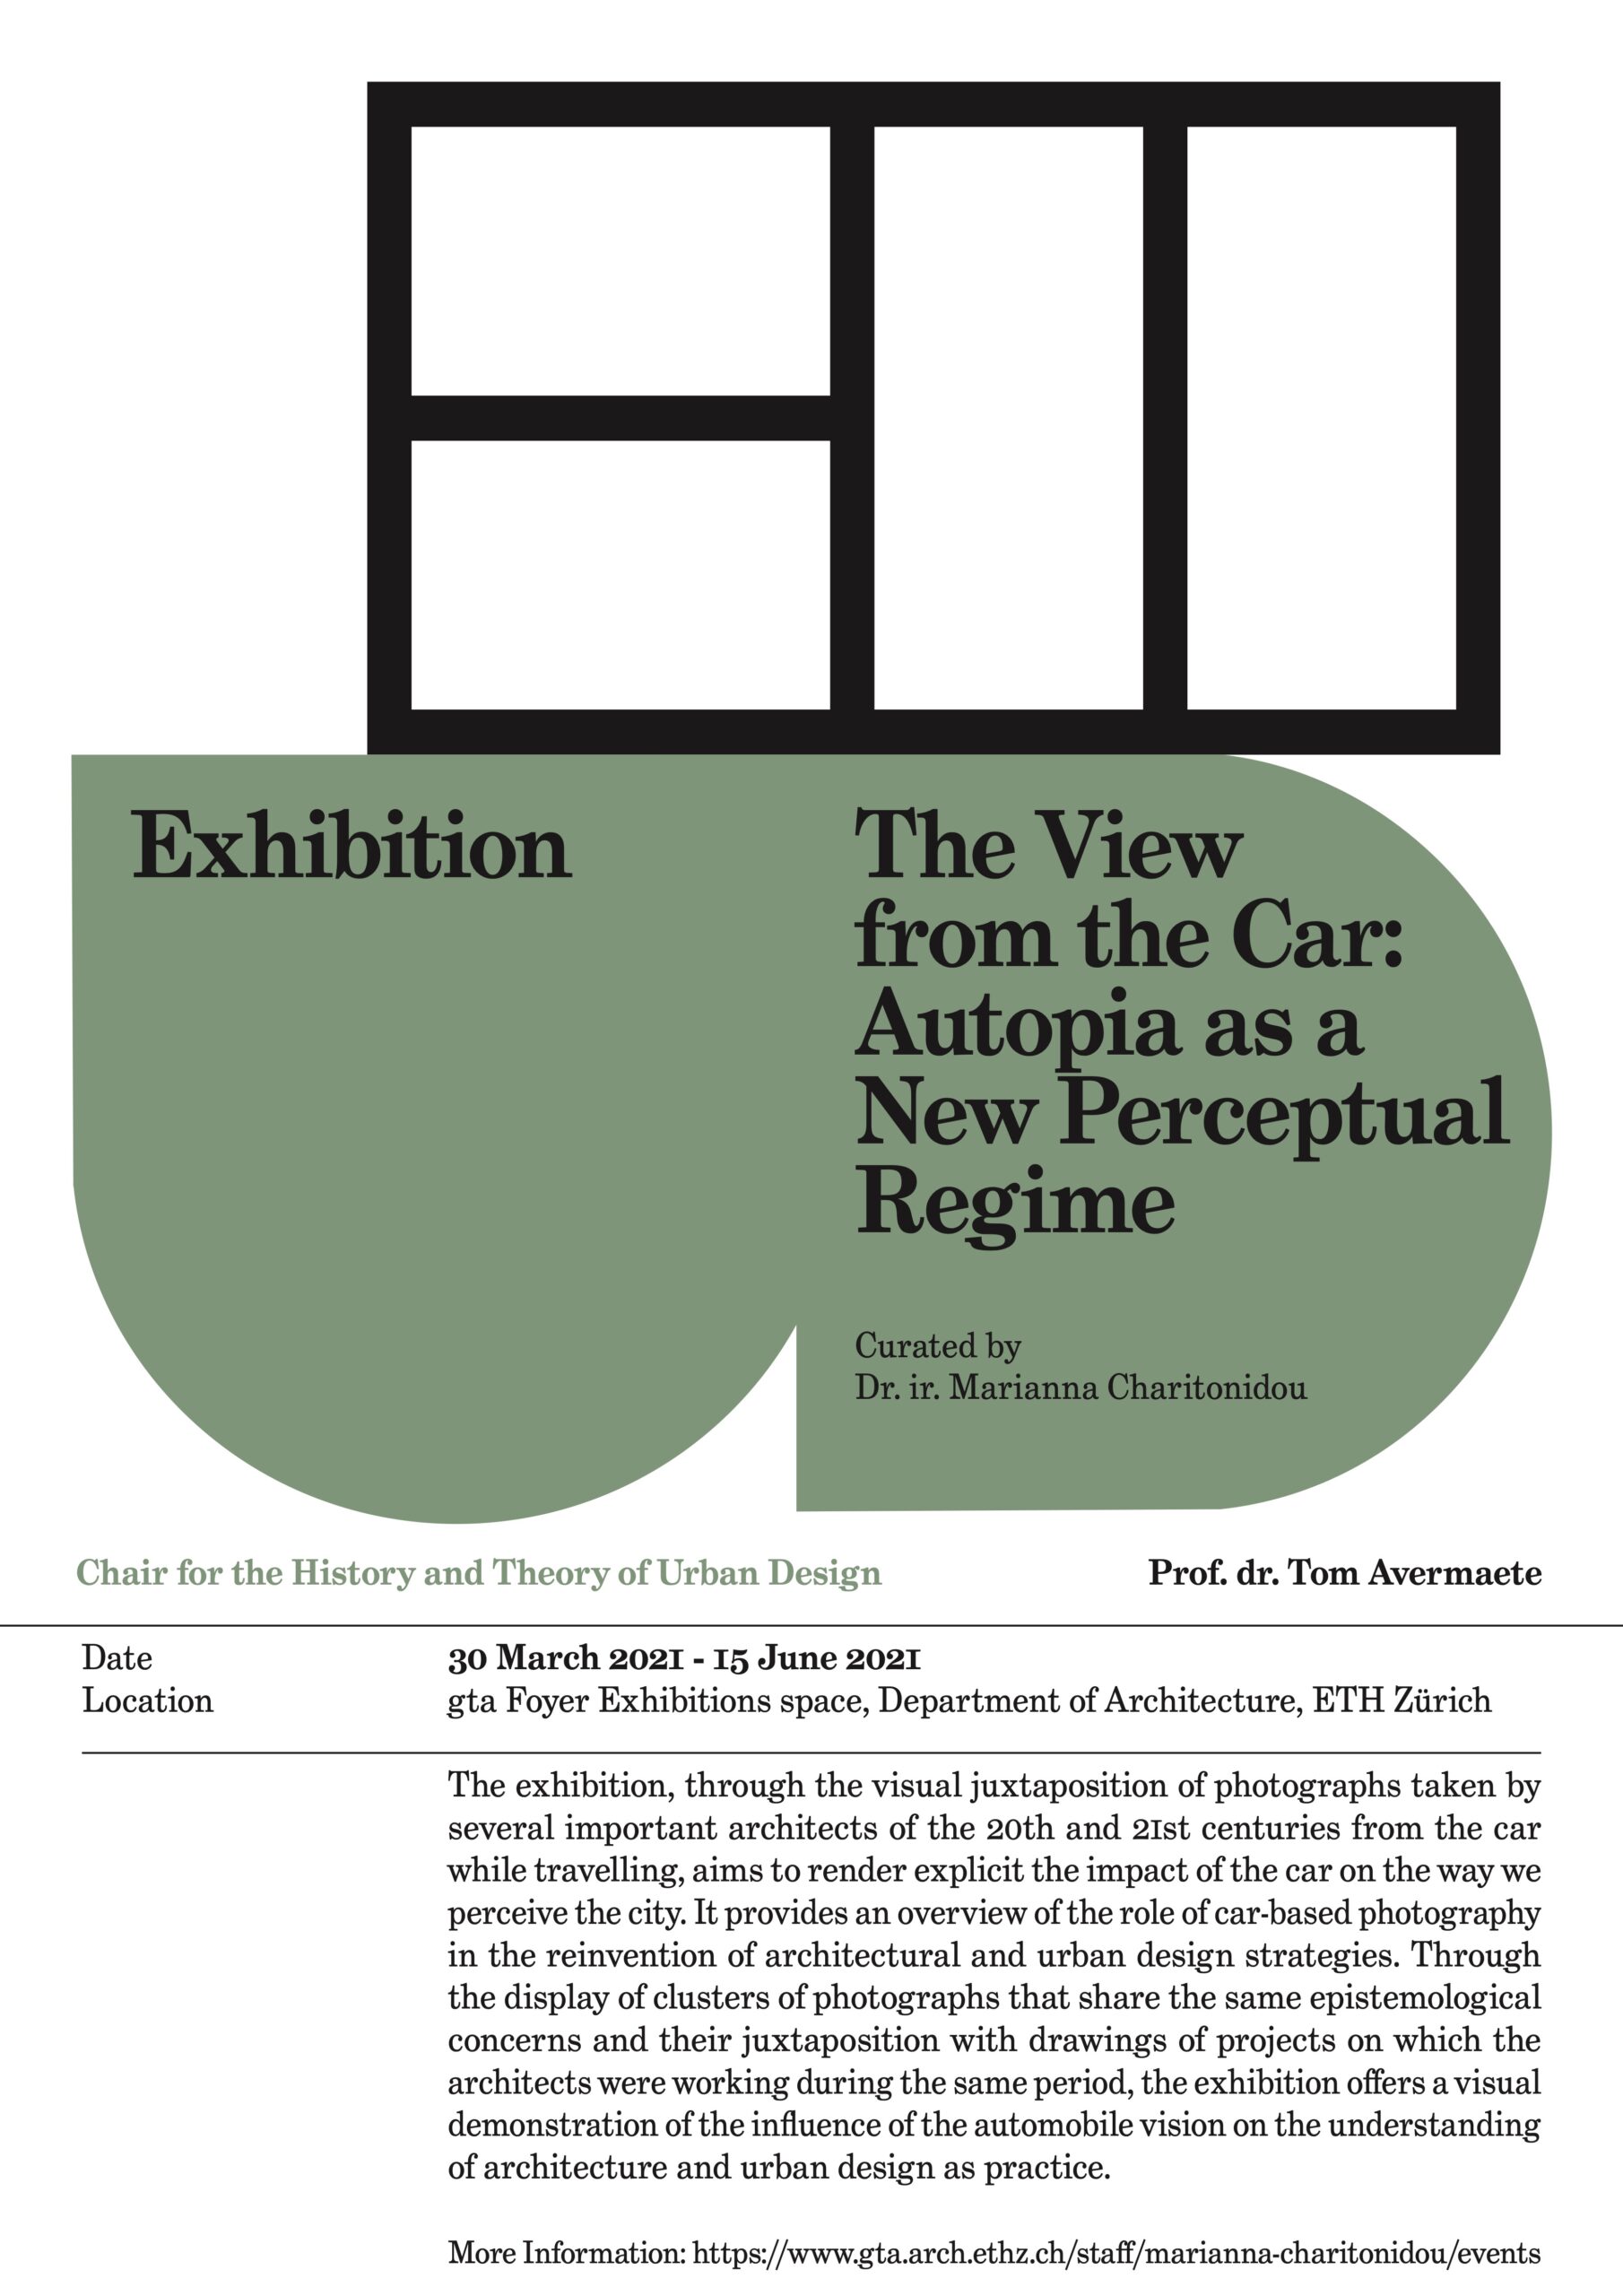 The View from the Car: Autopia as a New Perceptual Regime